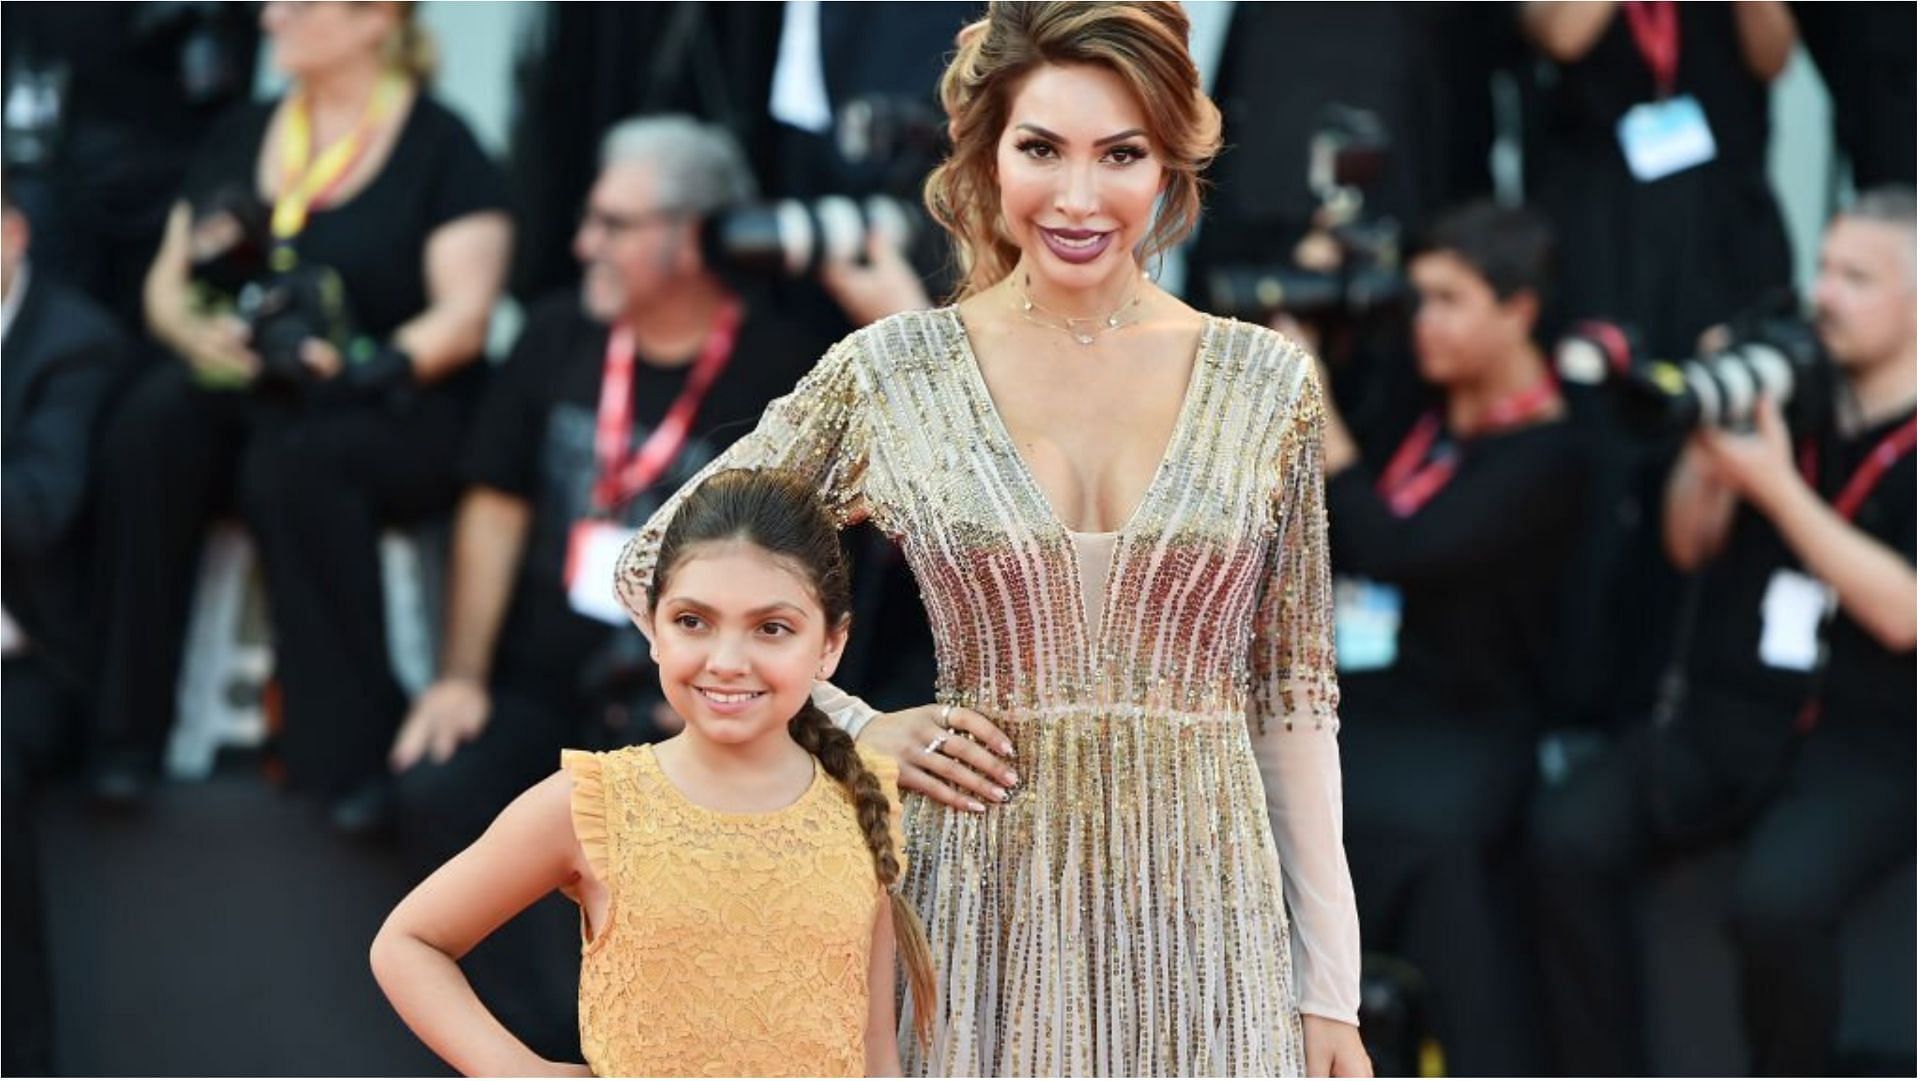 Farrah Abraham openly spoke about her support towards her daughter